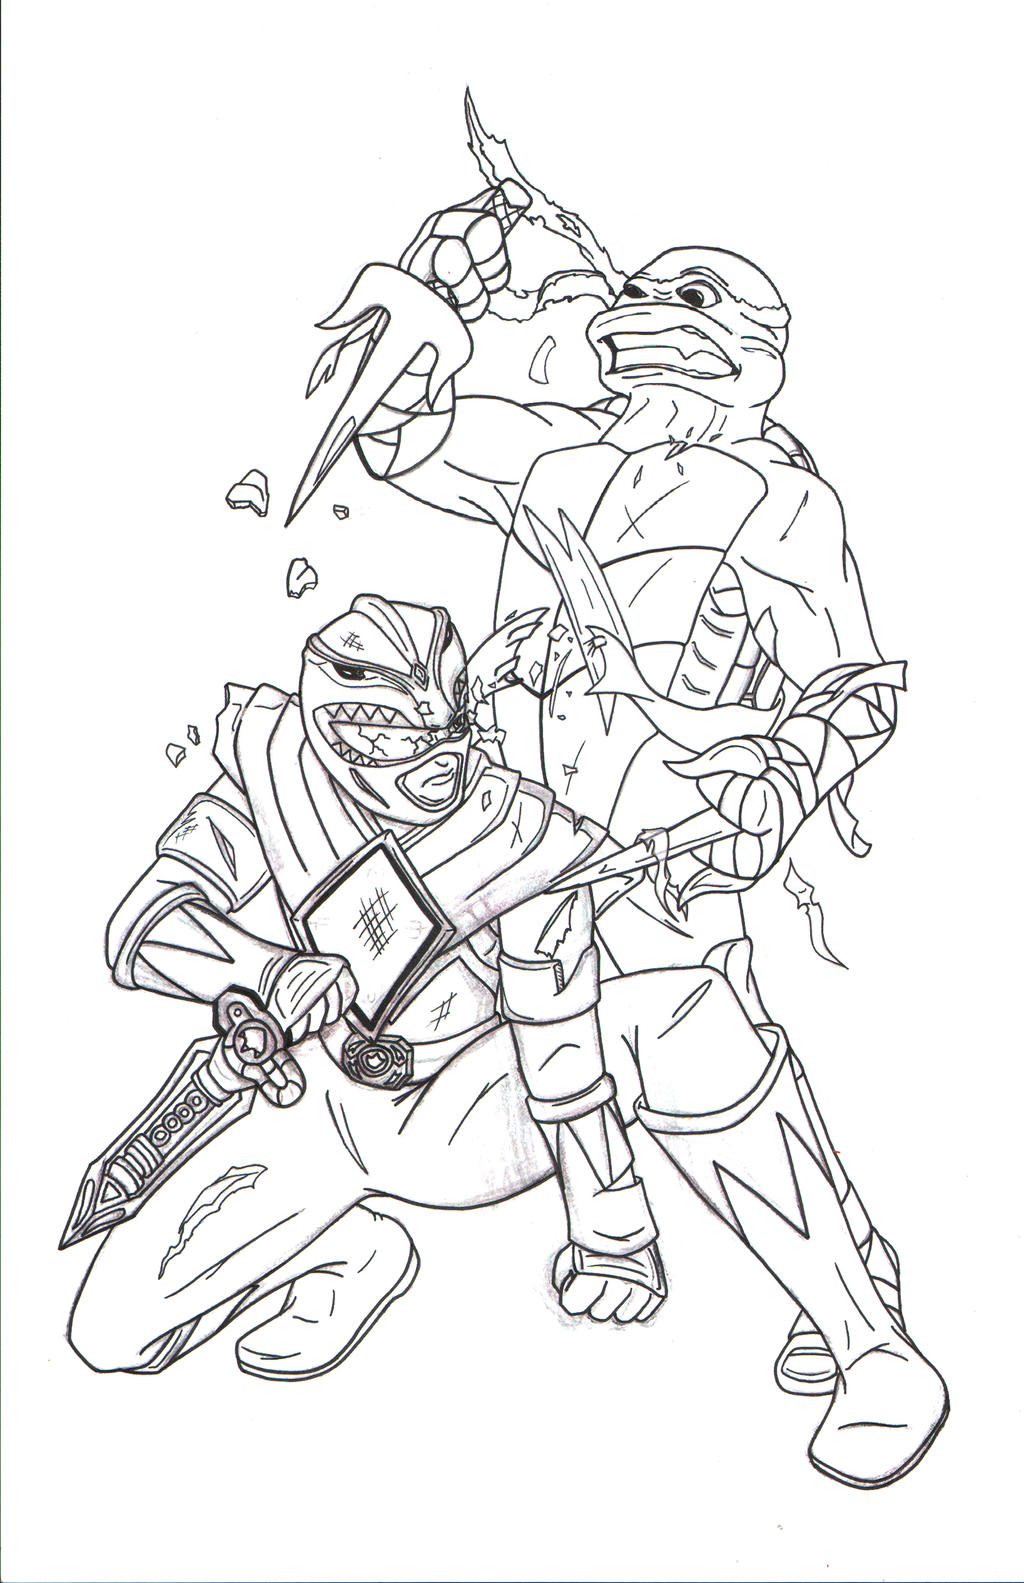 Mighty Morphin Power Rangers - Free Coloring Pages